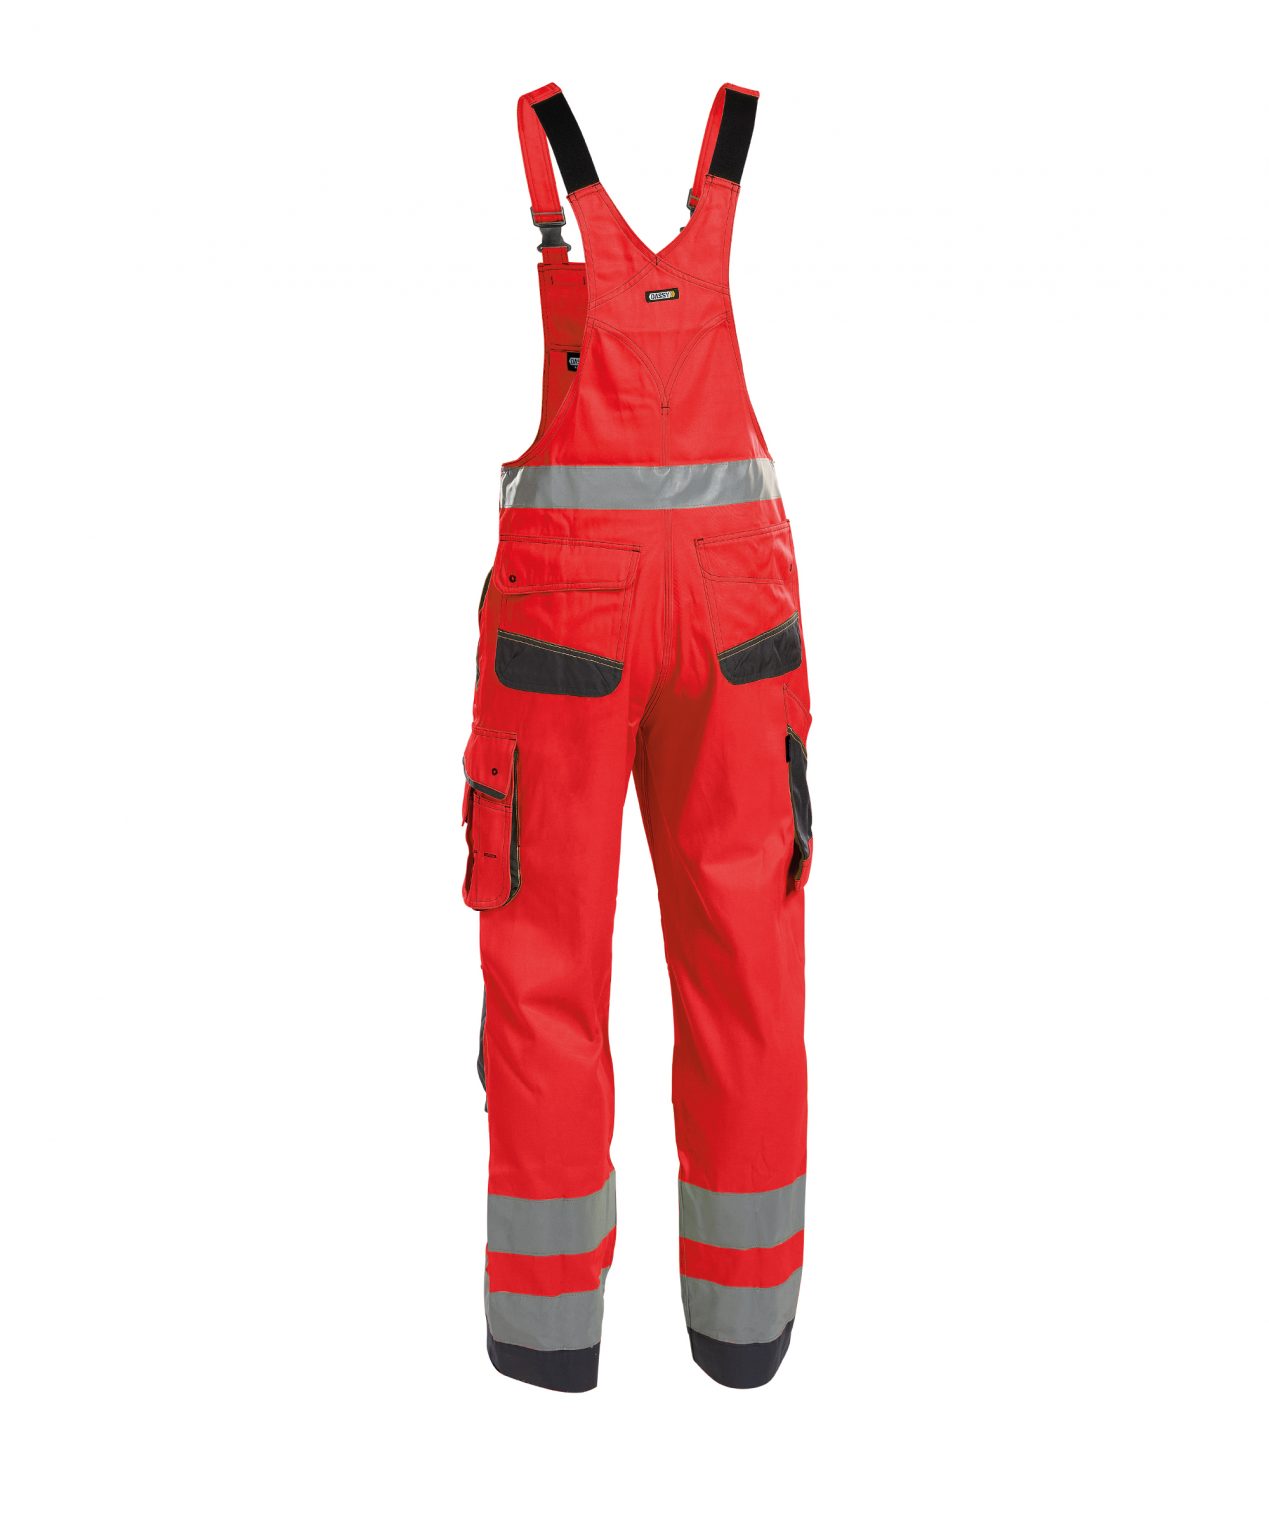 malmedy high visibility brace overall with knee pockets fluo red cement grey back